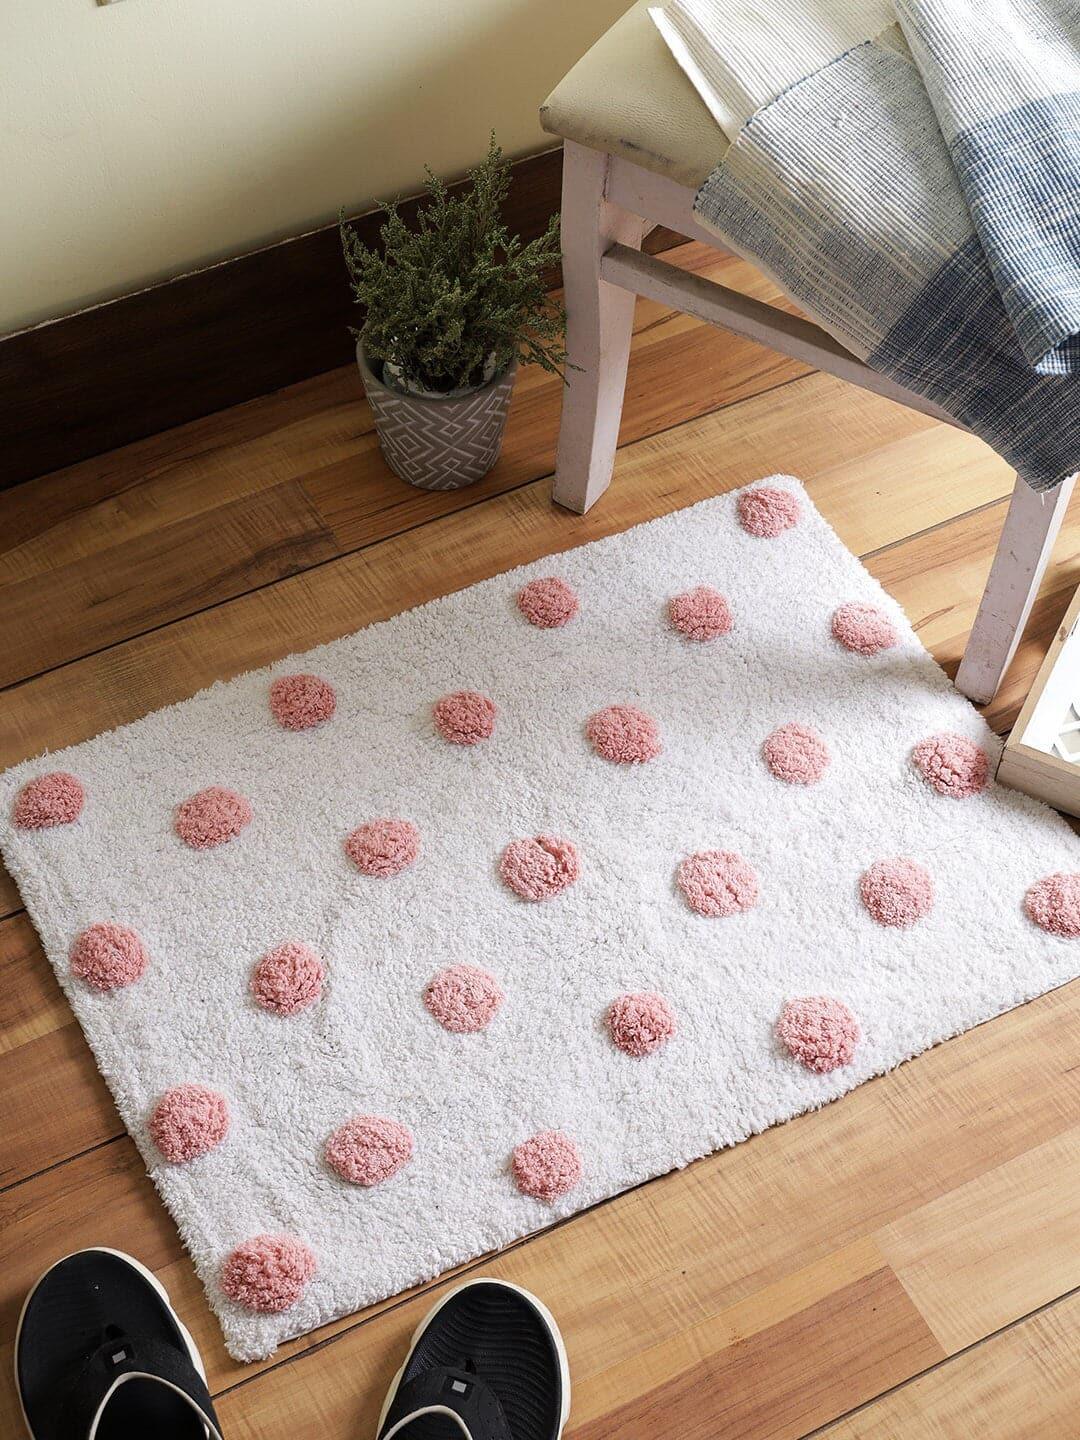 Pink and White Polka Dots Hand Tufted Cotton Bath Rug - MAIA HOMES